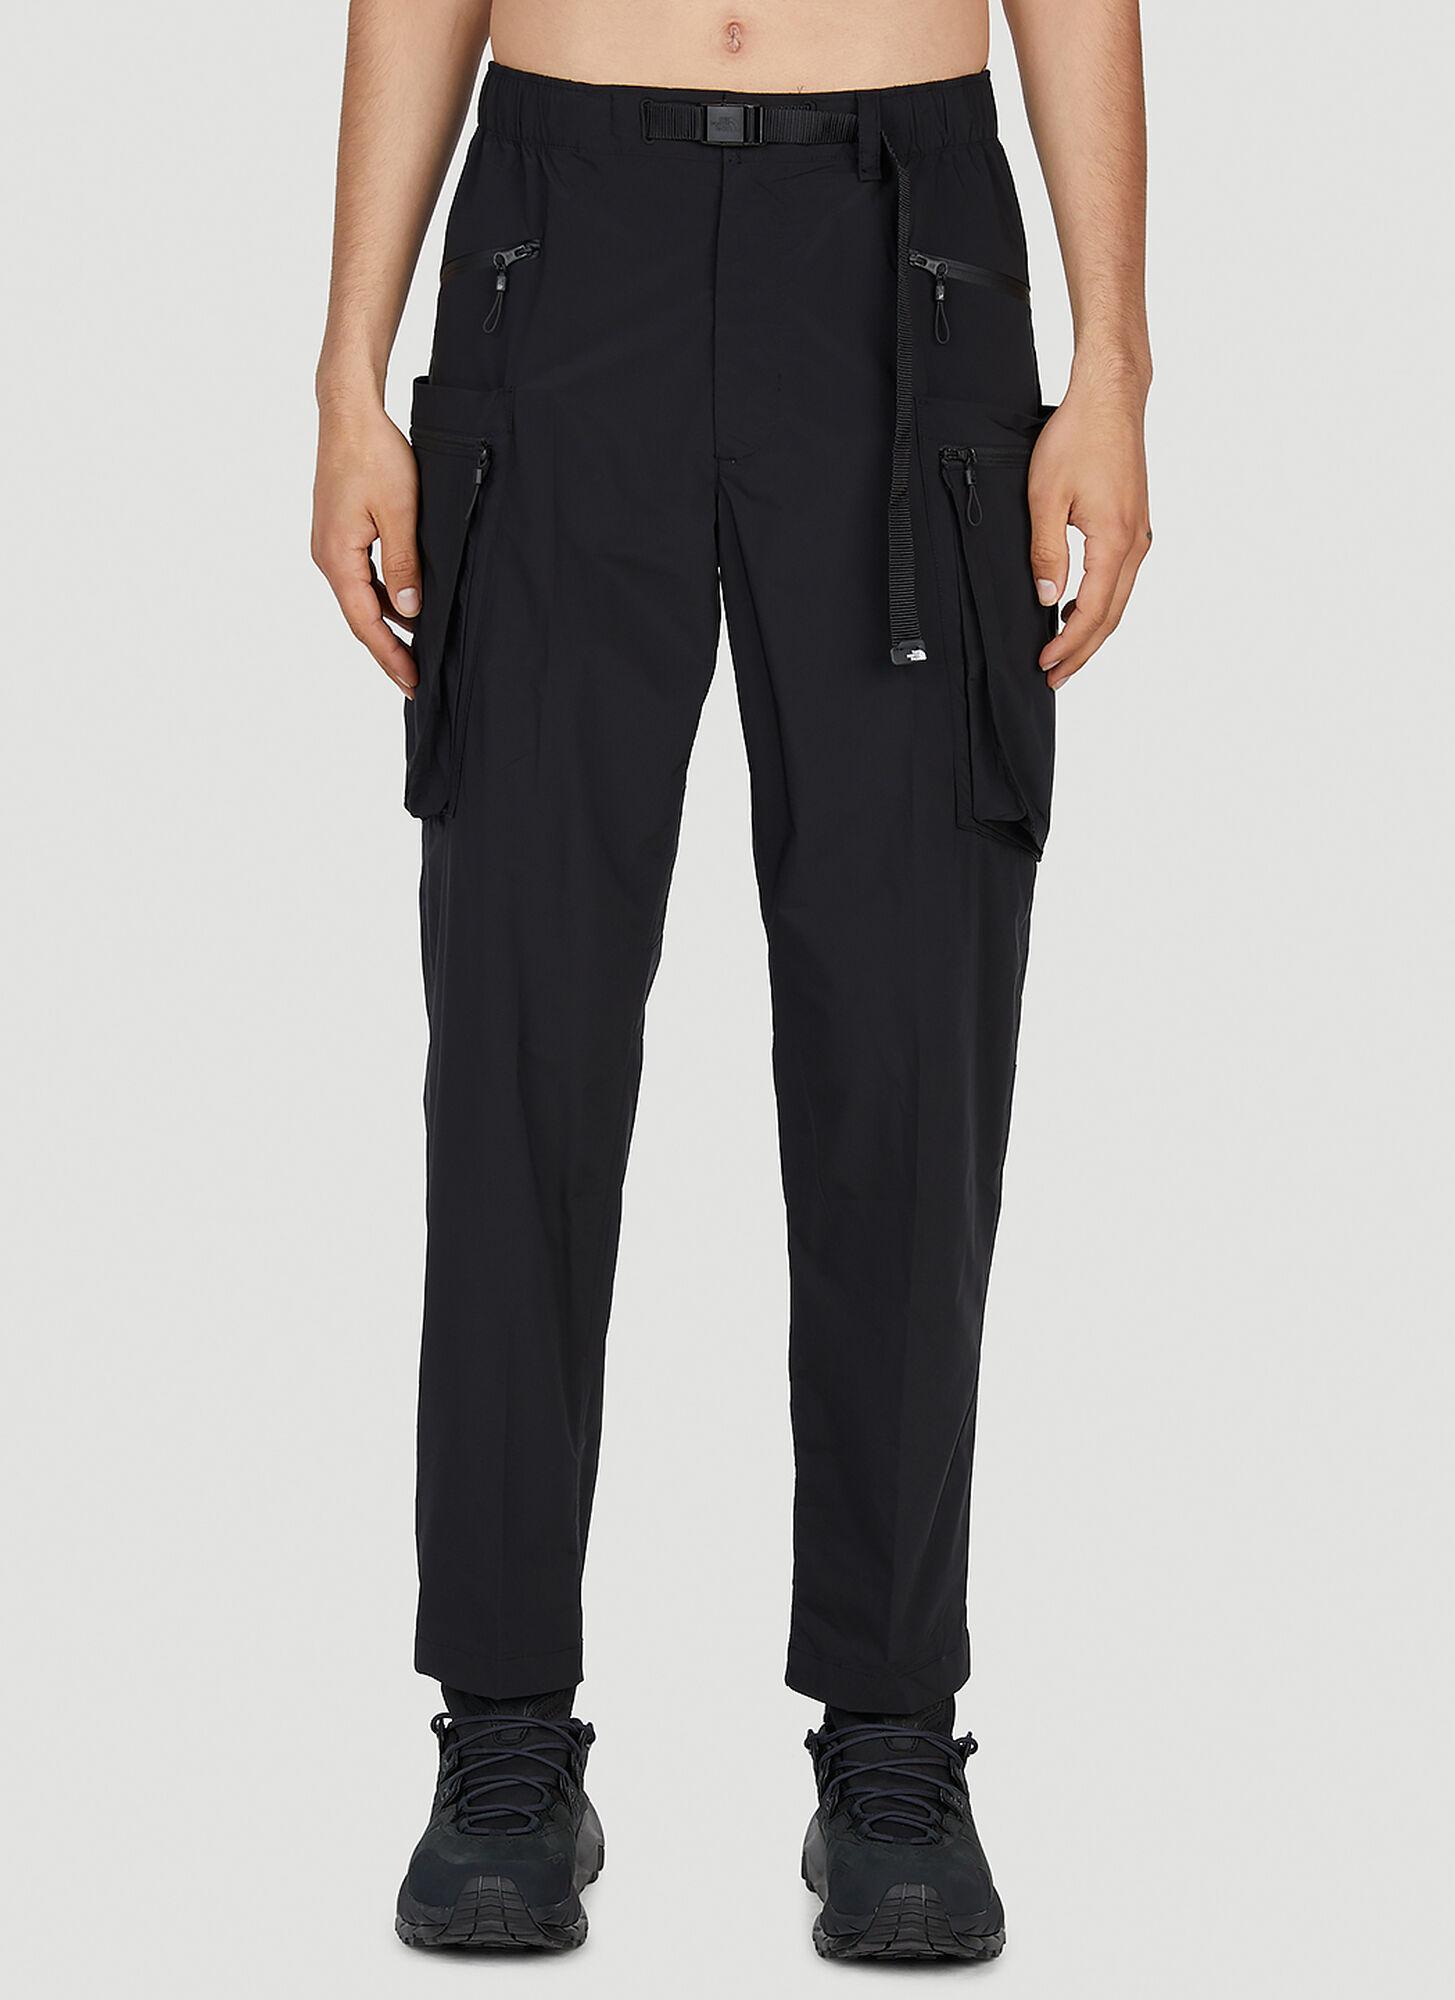 The North Face Black Series Cargo Pants Male Black